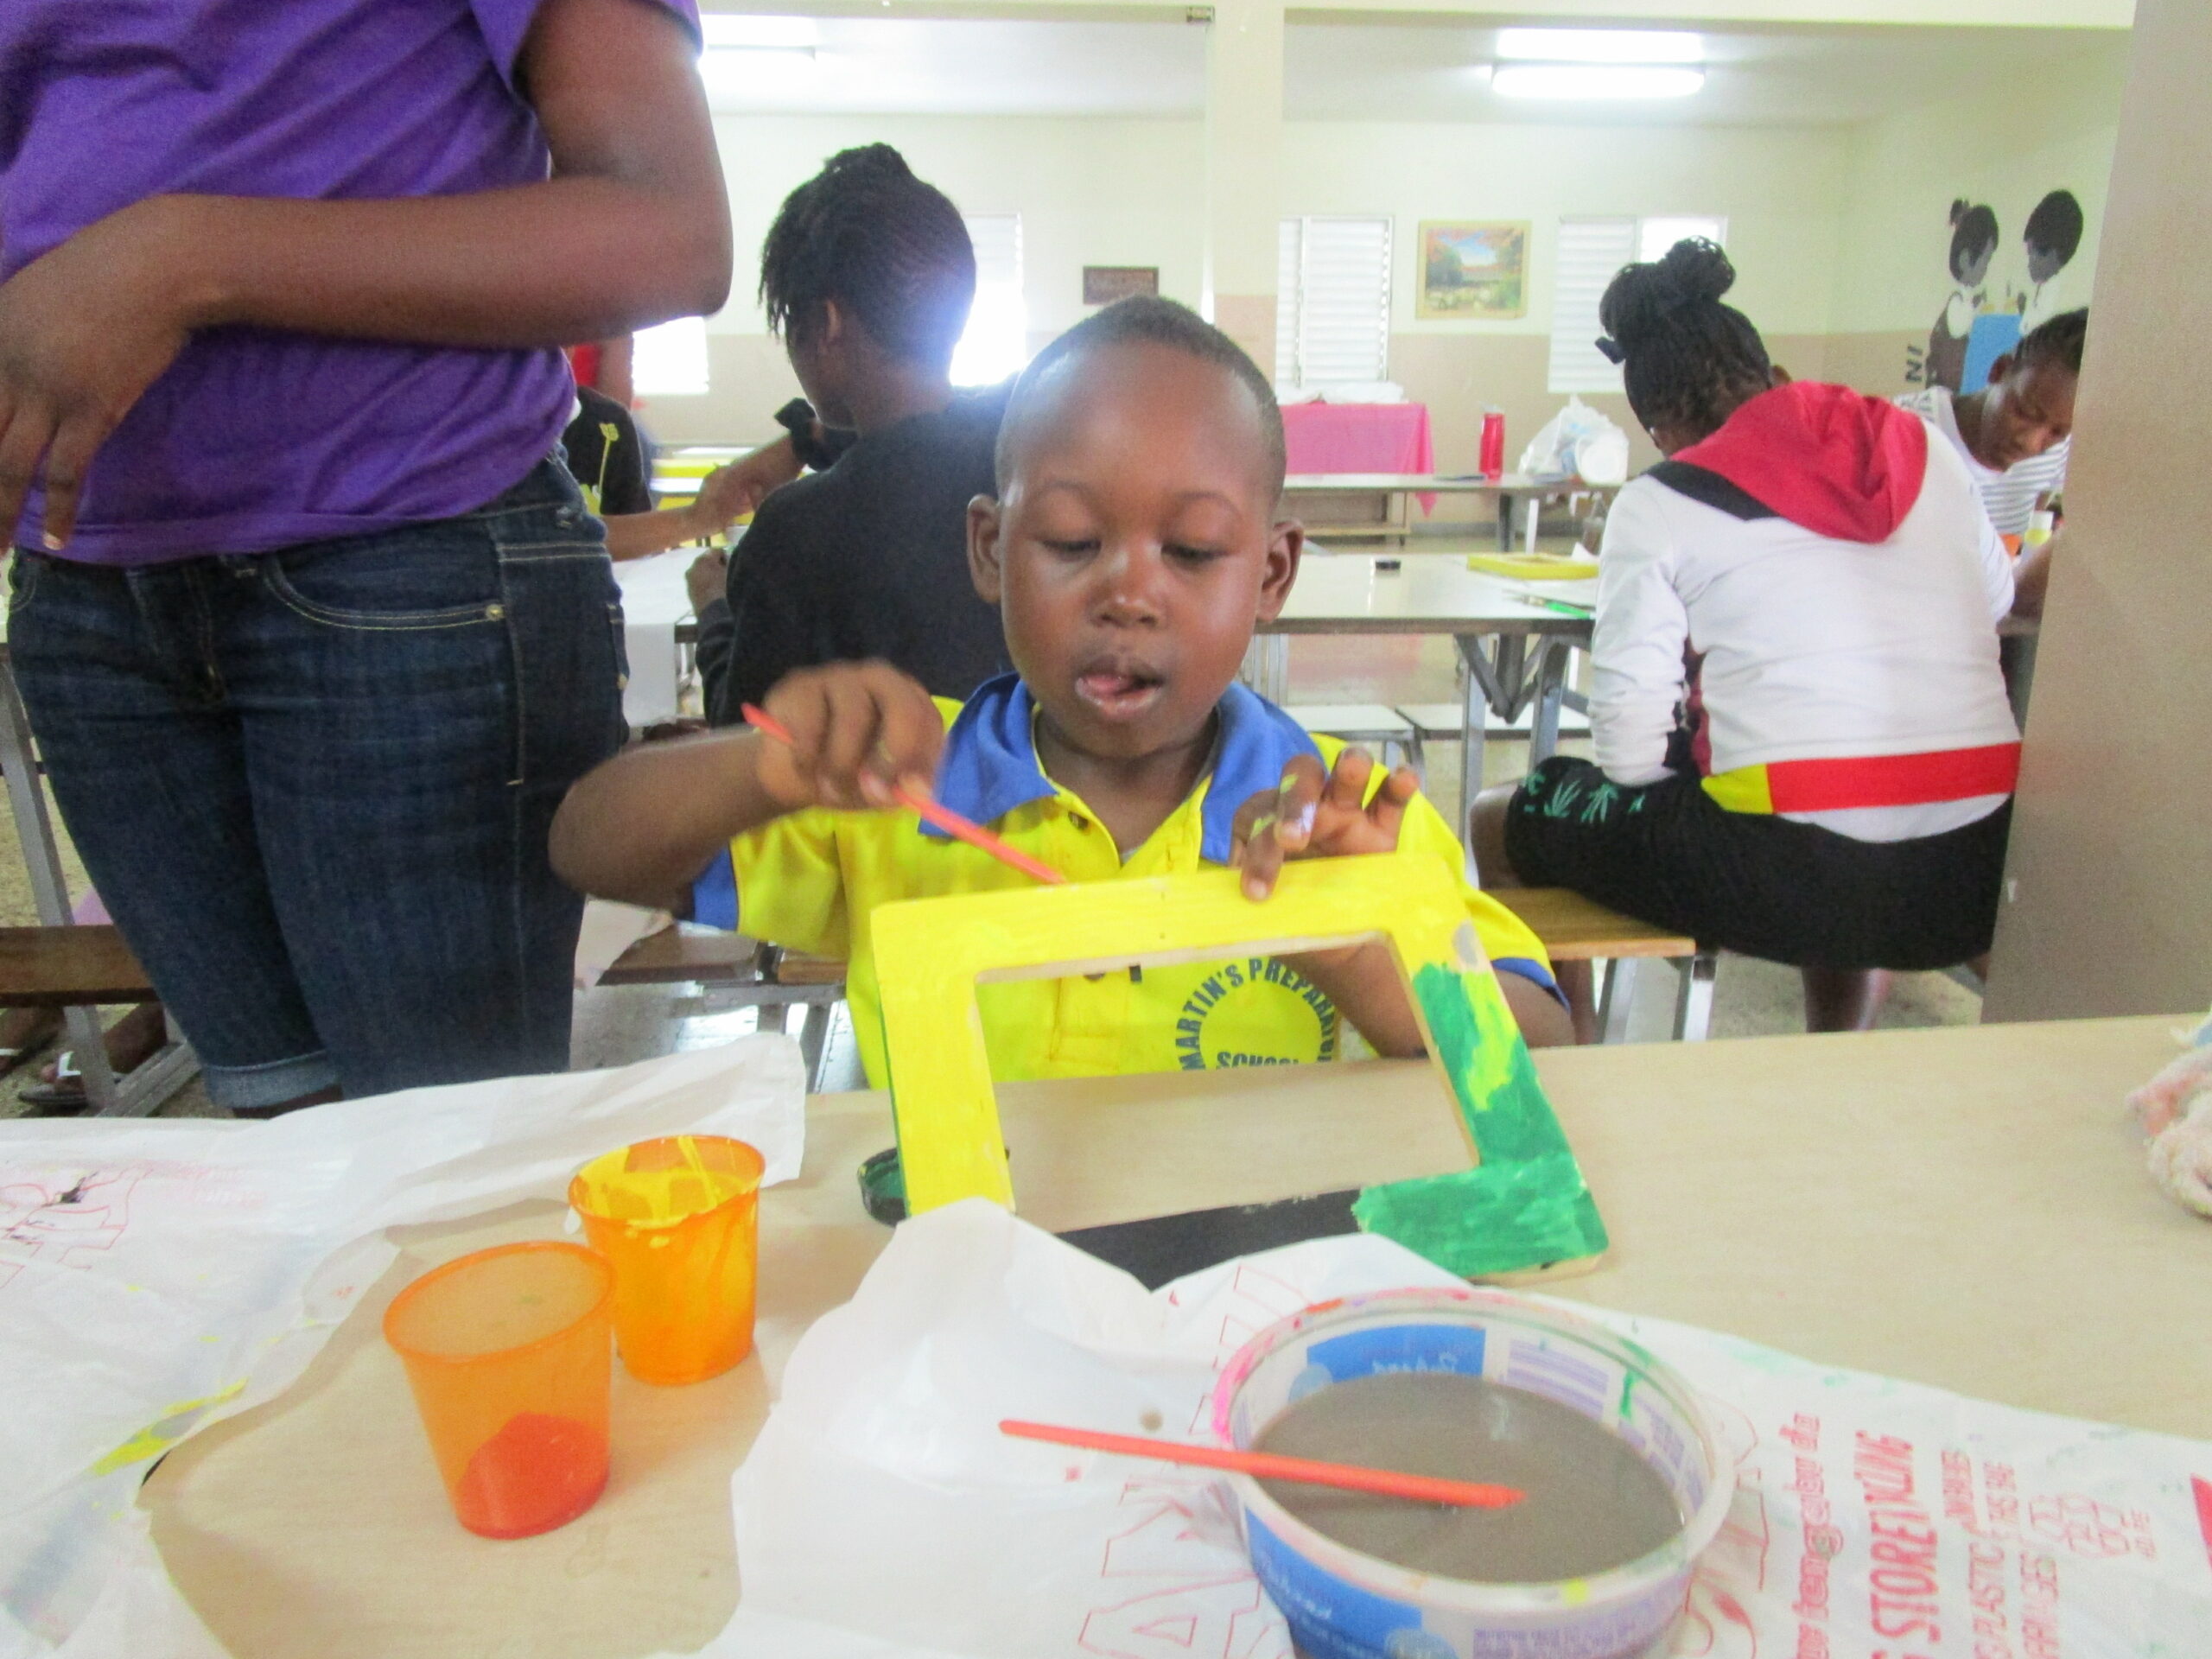 Doing Artwork with Students at CCCD, Jamaica